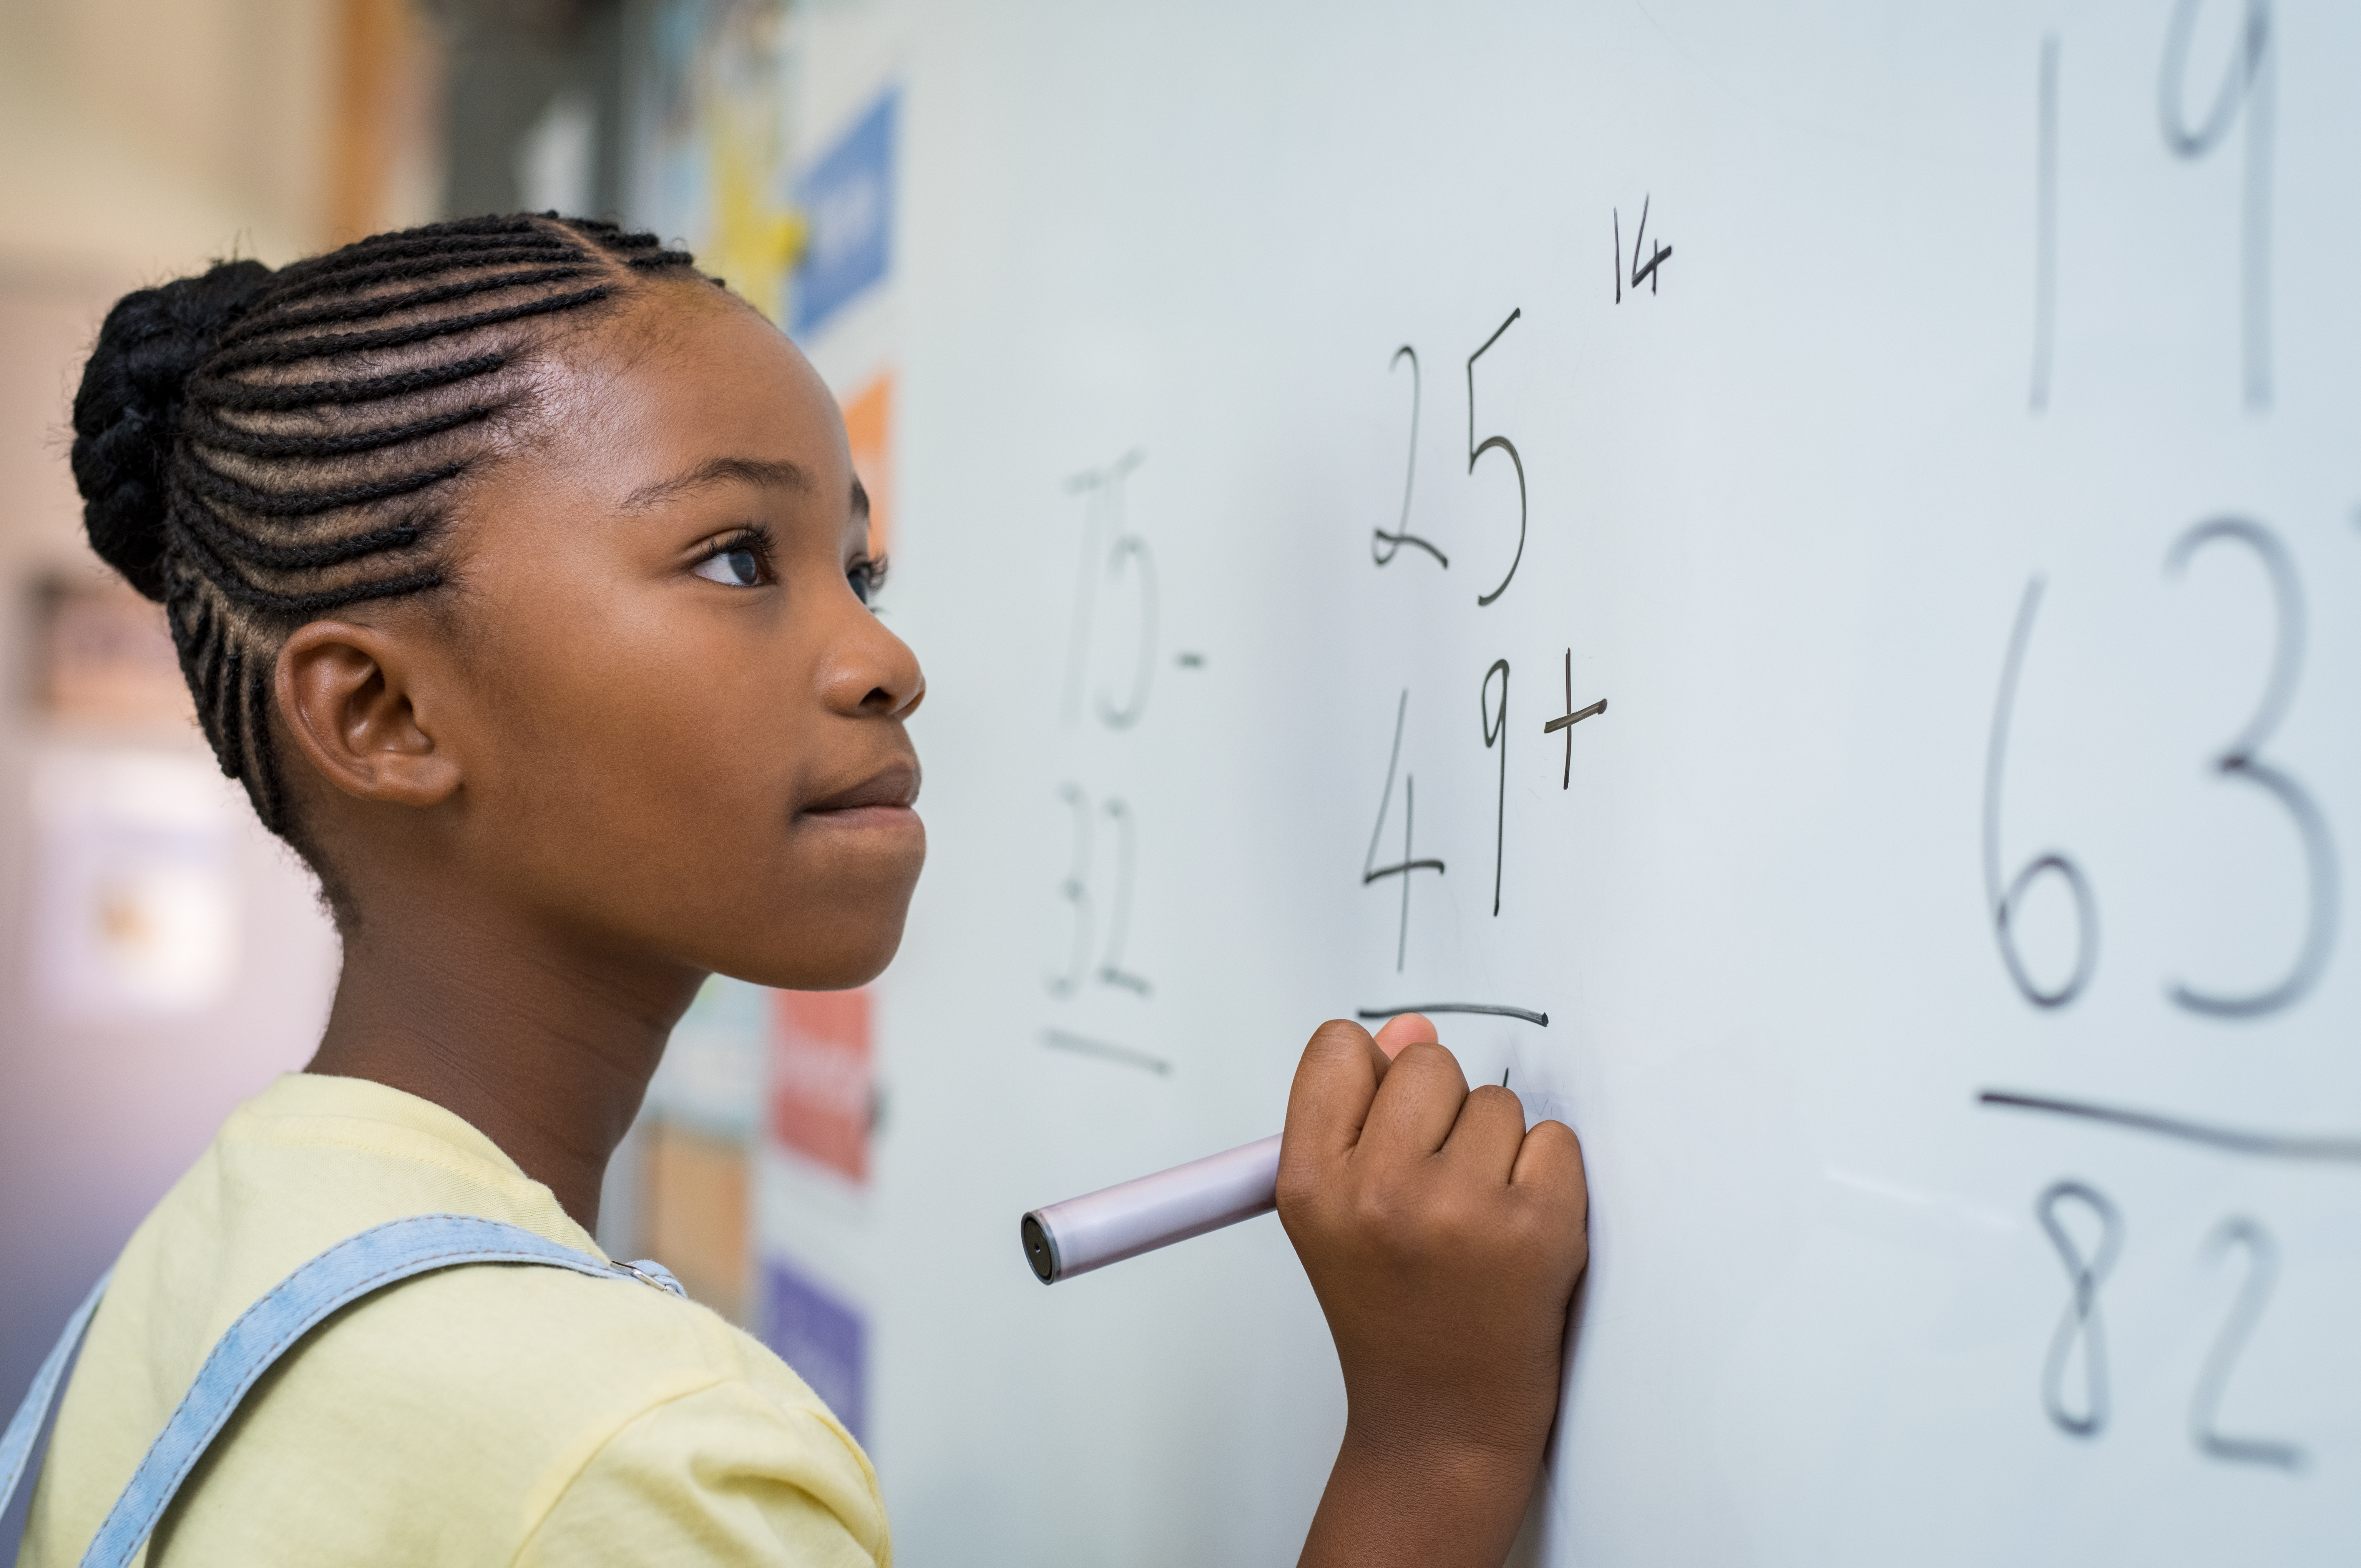 Young girl stands at white board with marker in hand, pondering a math equation.